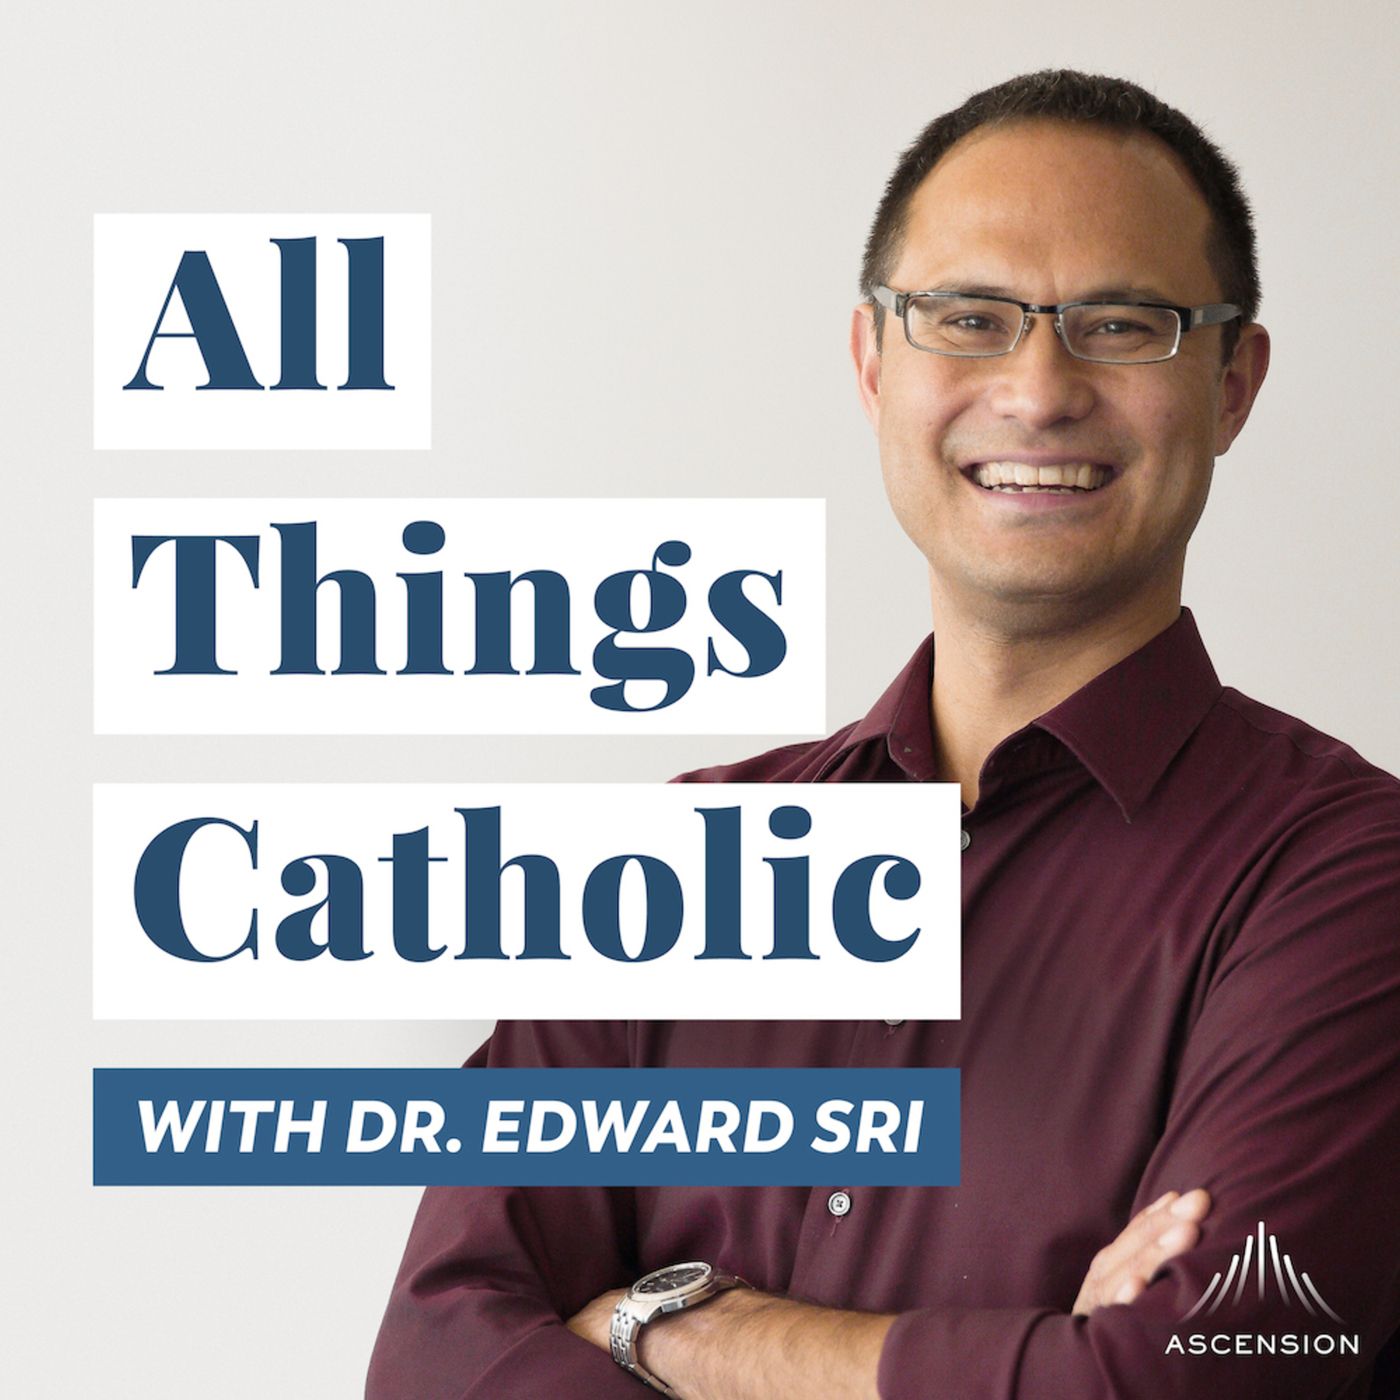 All things Catholic Podcast